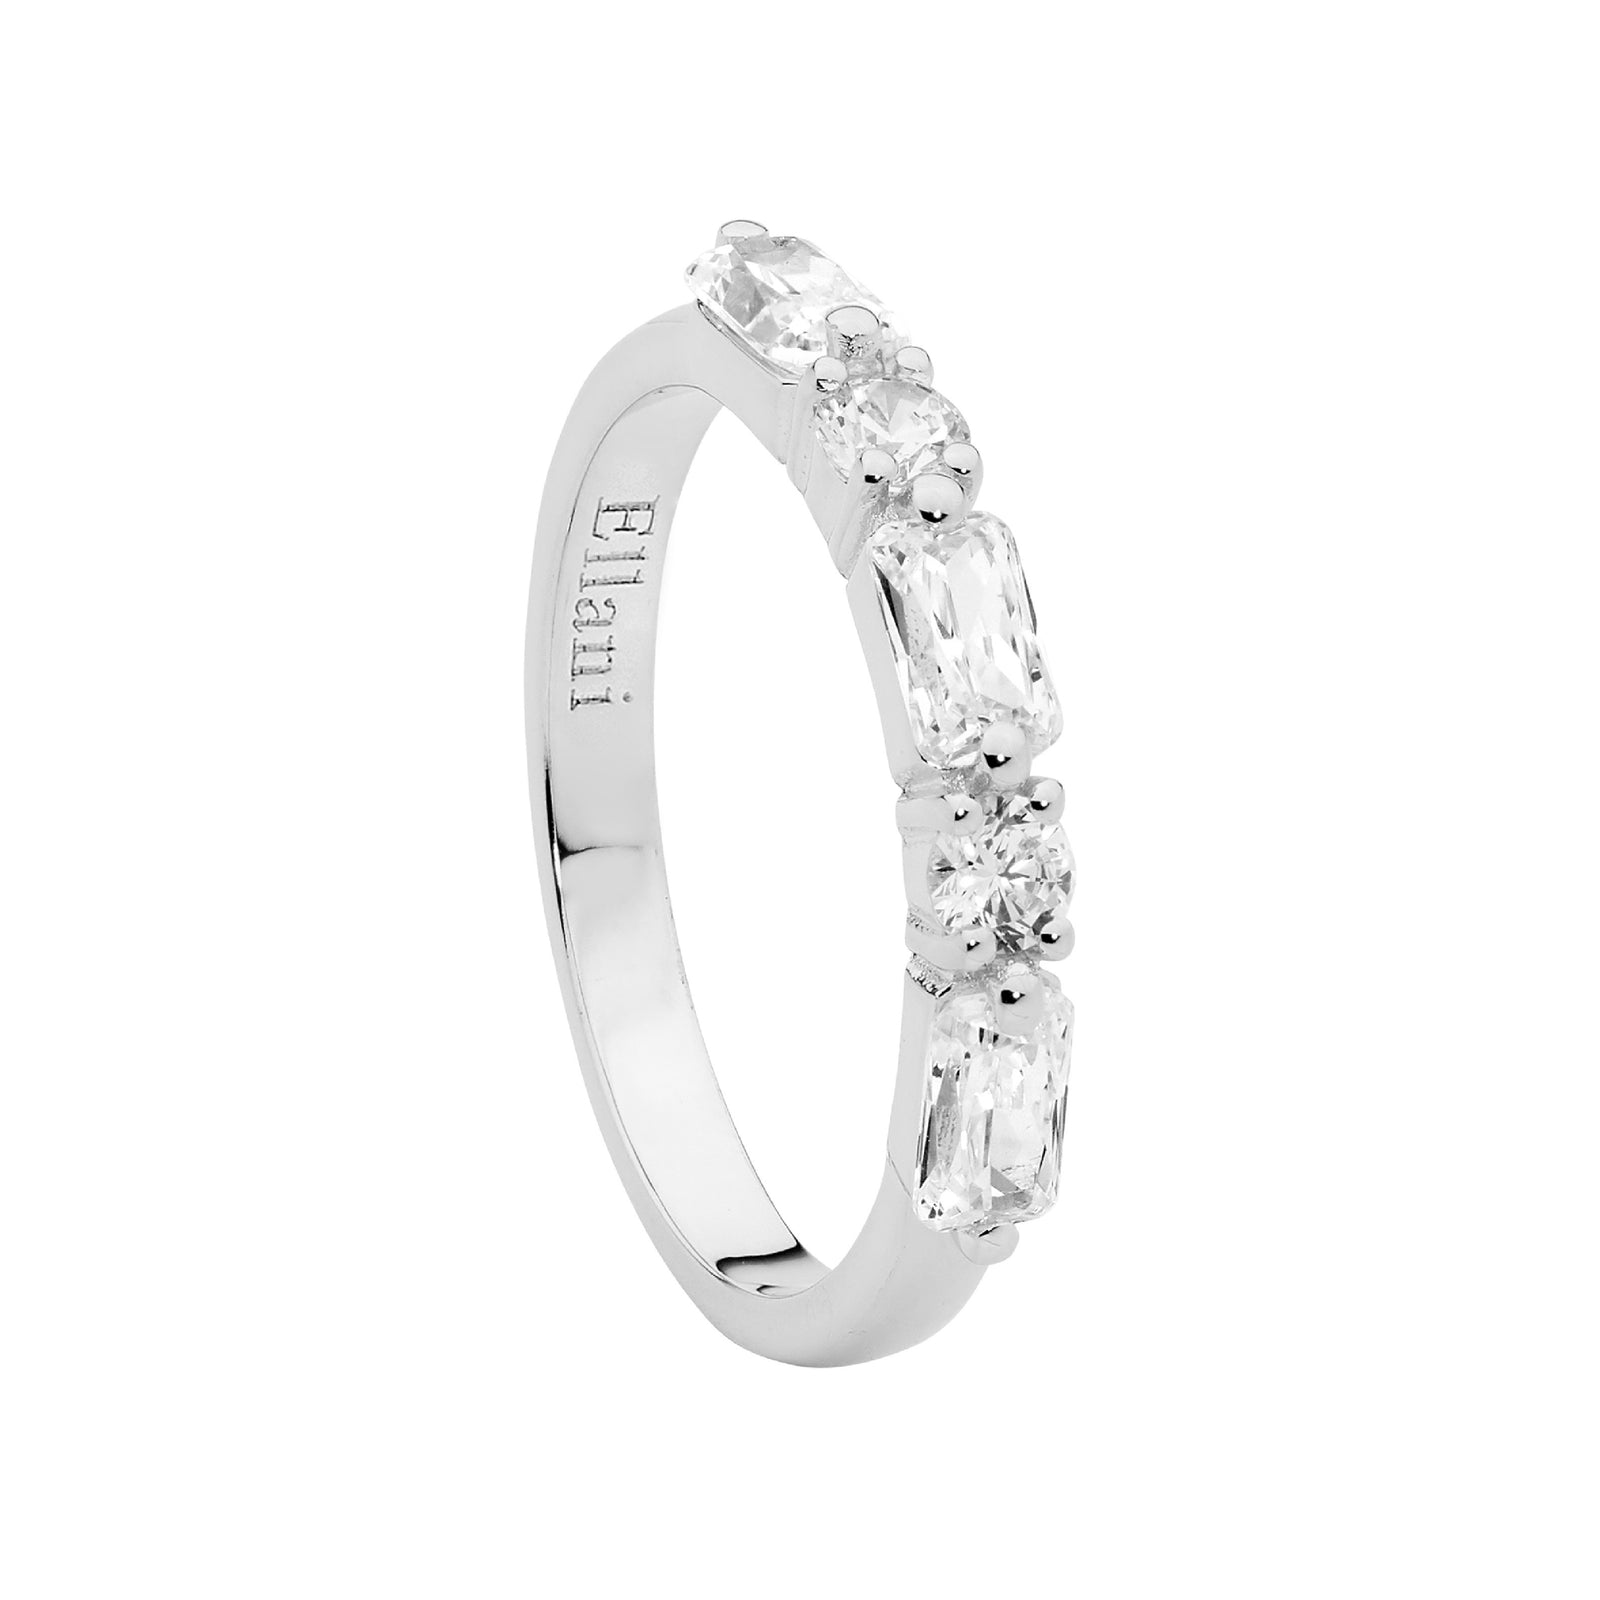 Ellani Sterling Silver Cubic Zirconia Round & Baguette Ring